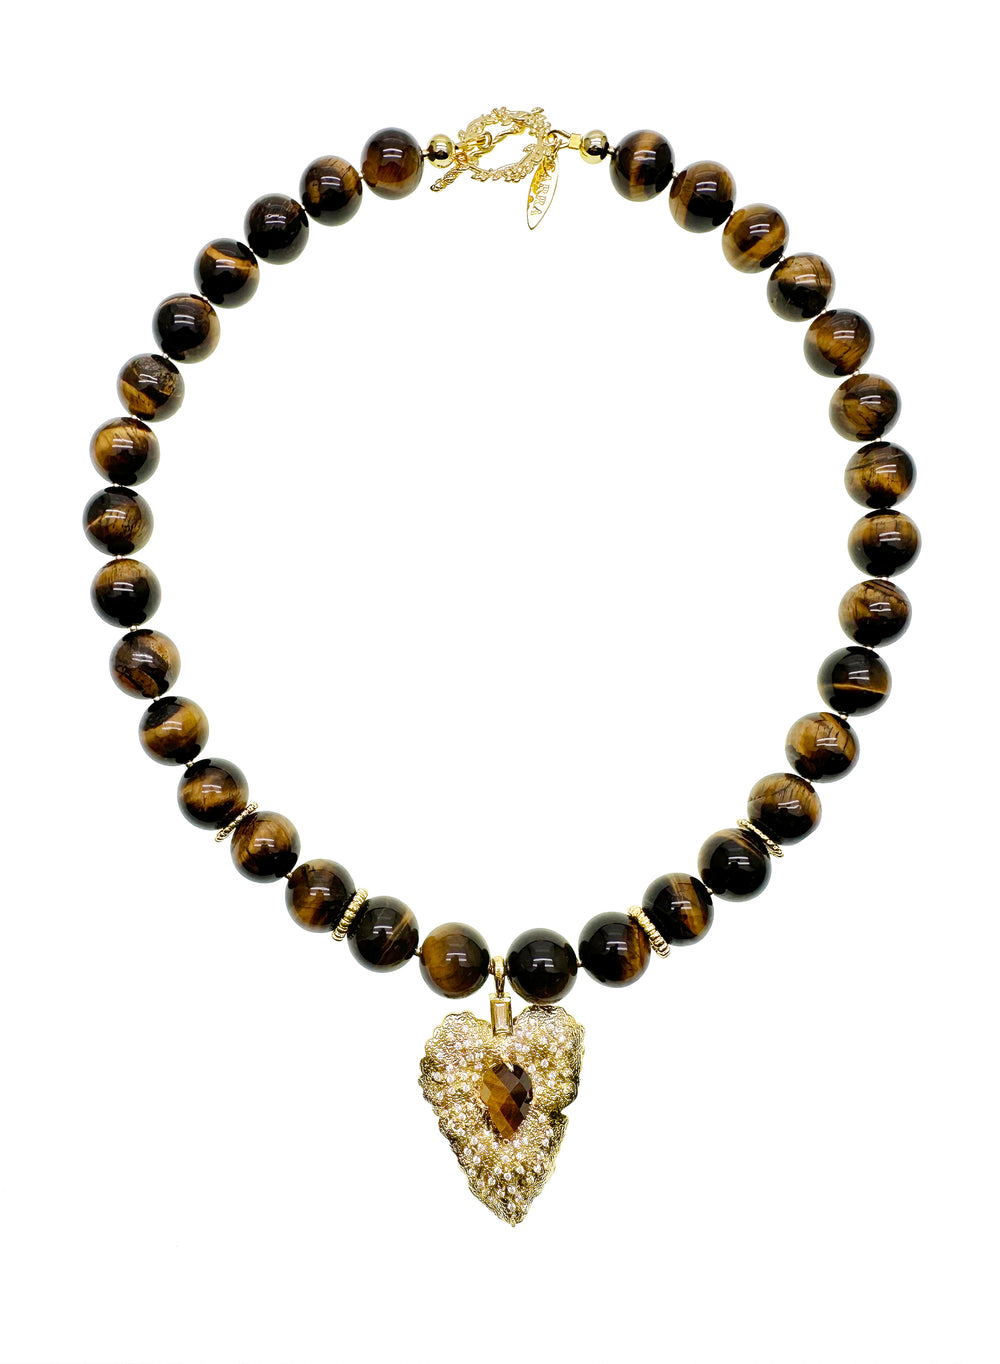 Tiger Eye Stone With Leaf Pendant Necklace KN038 - FARRA